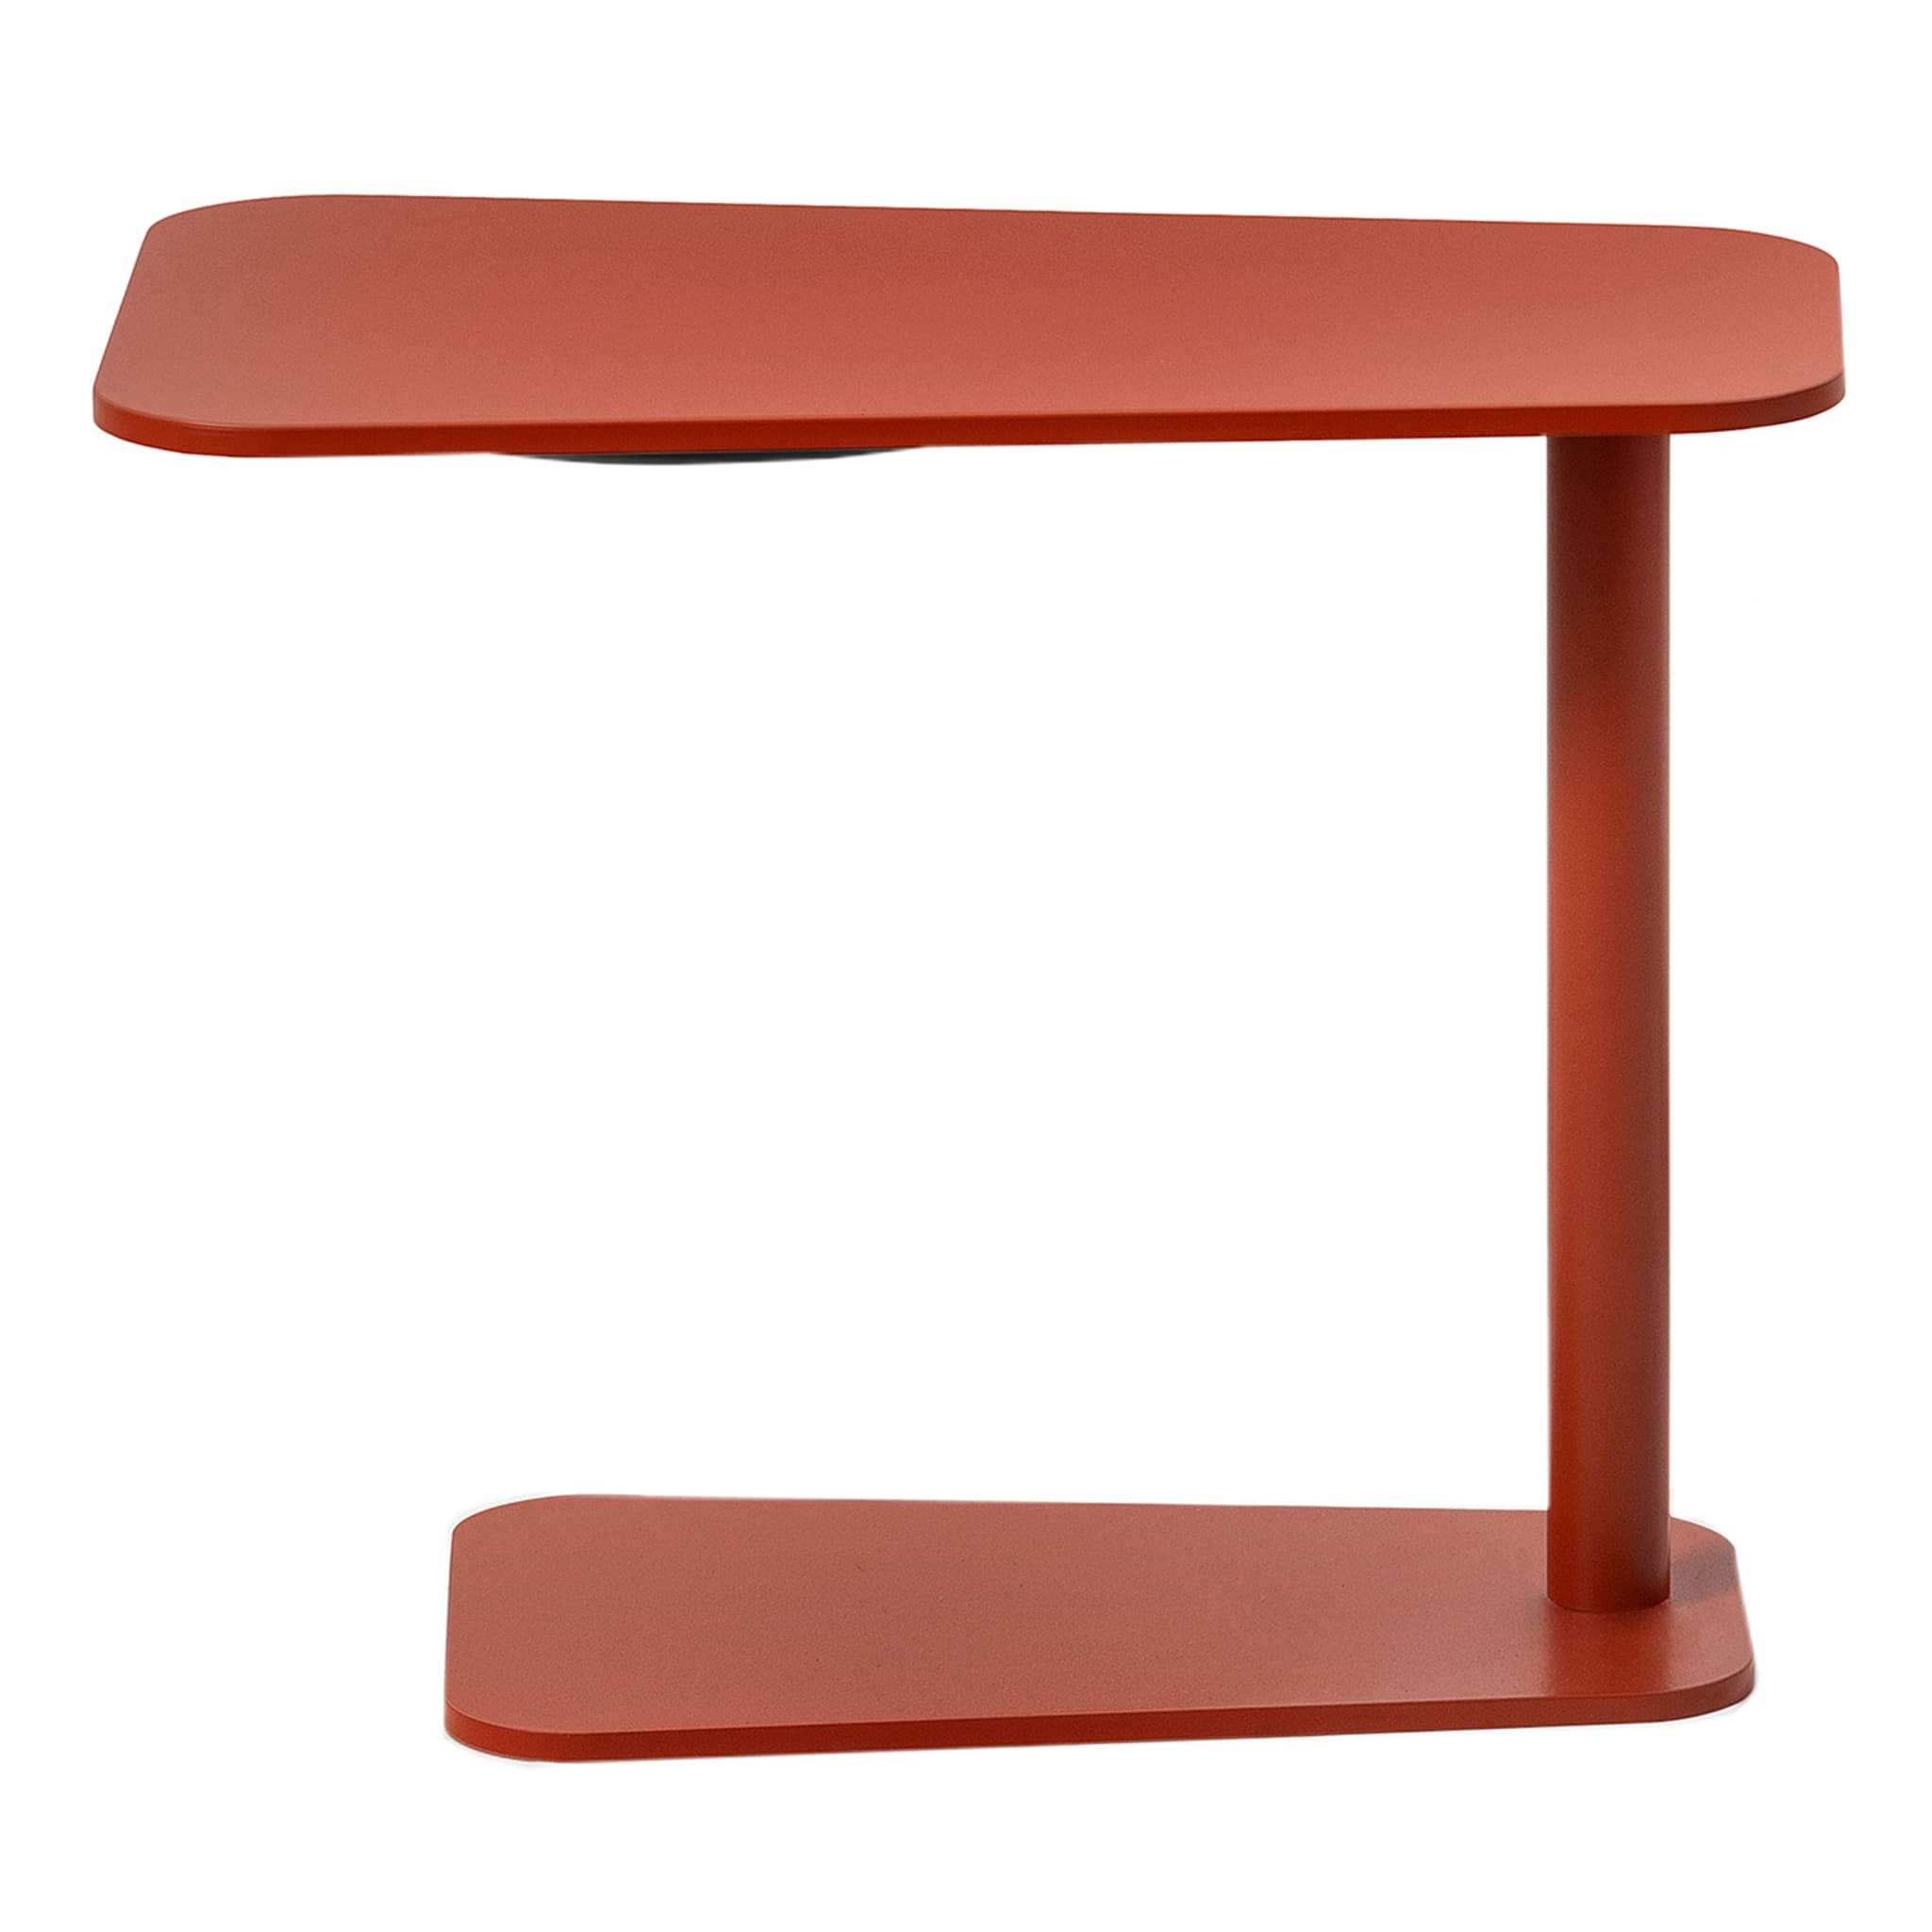 0130 Jens Red Side Table by Massimo Broglio - Main view